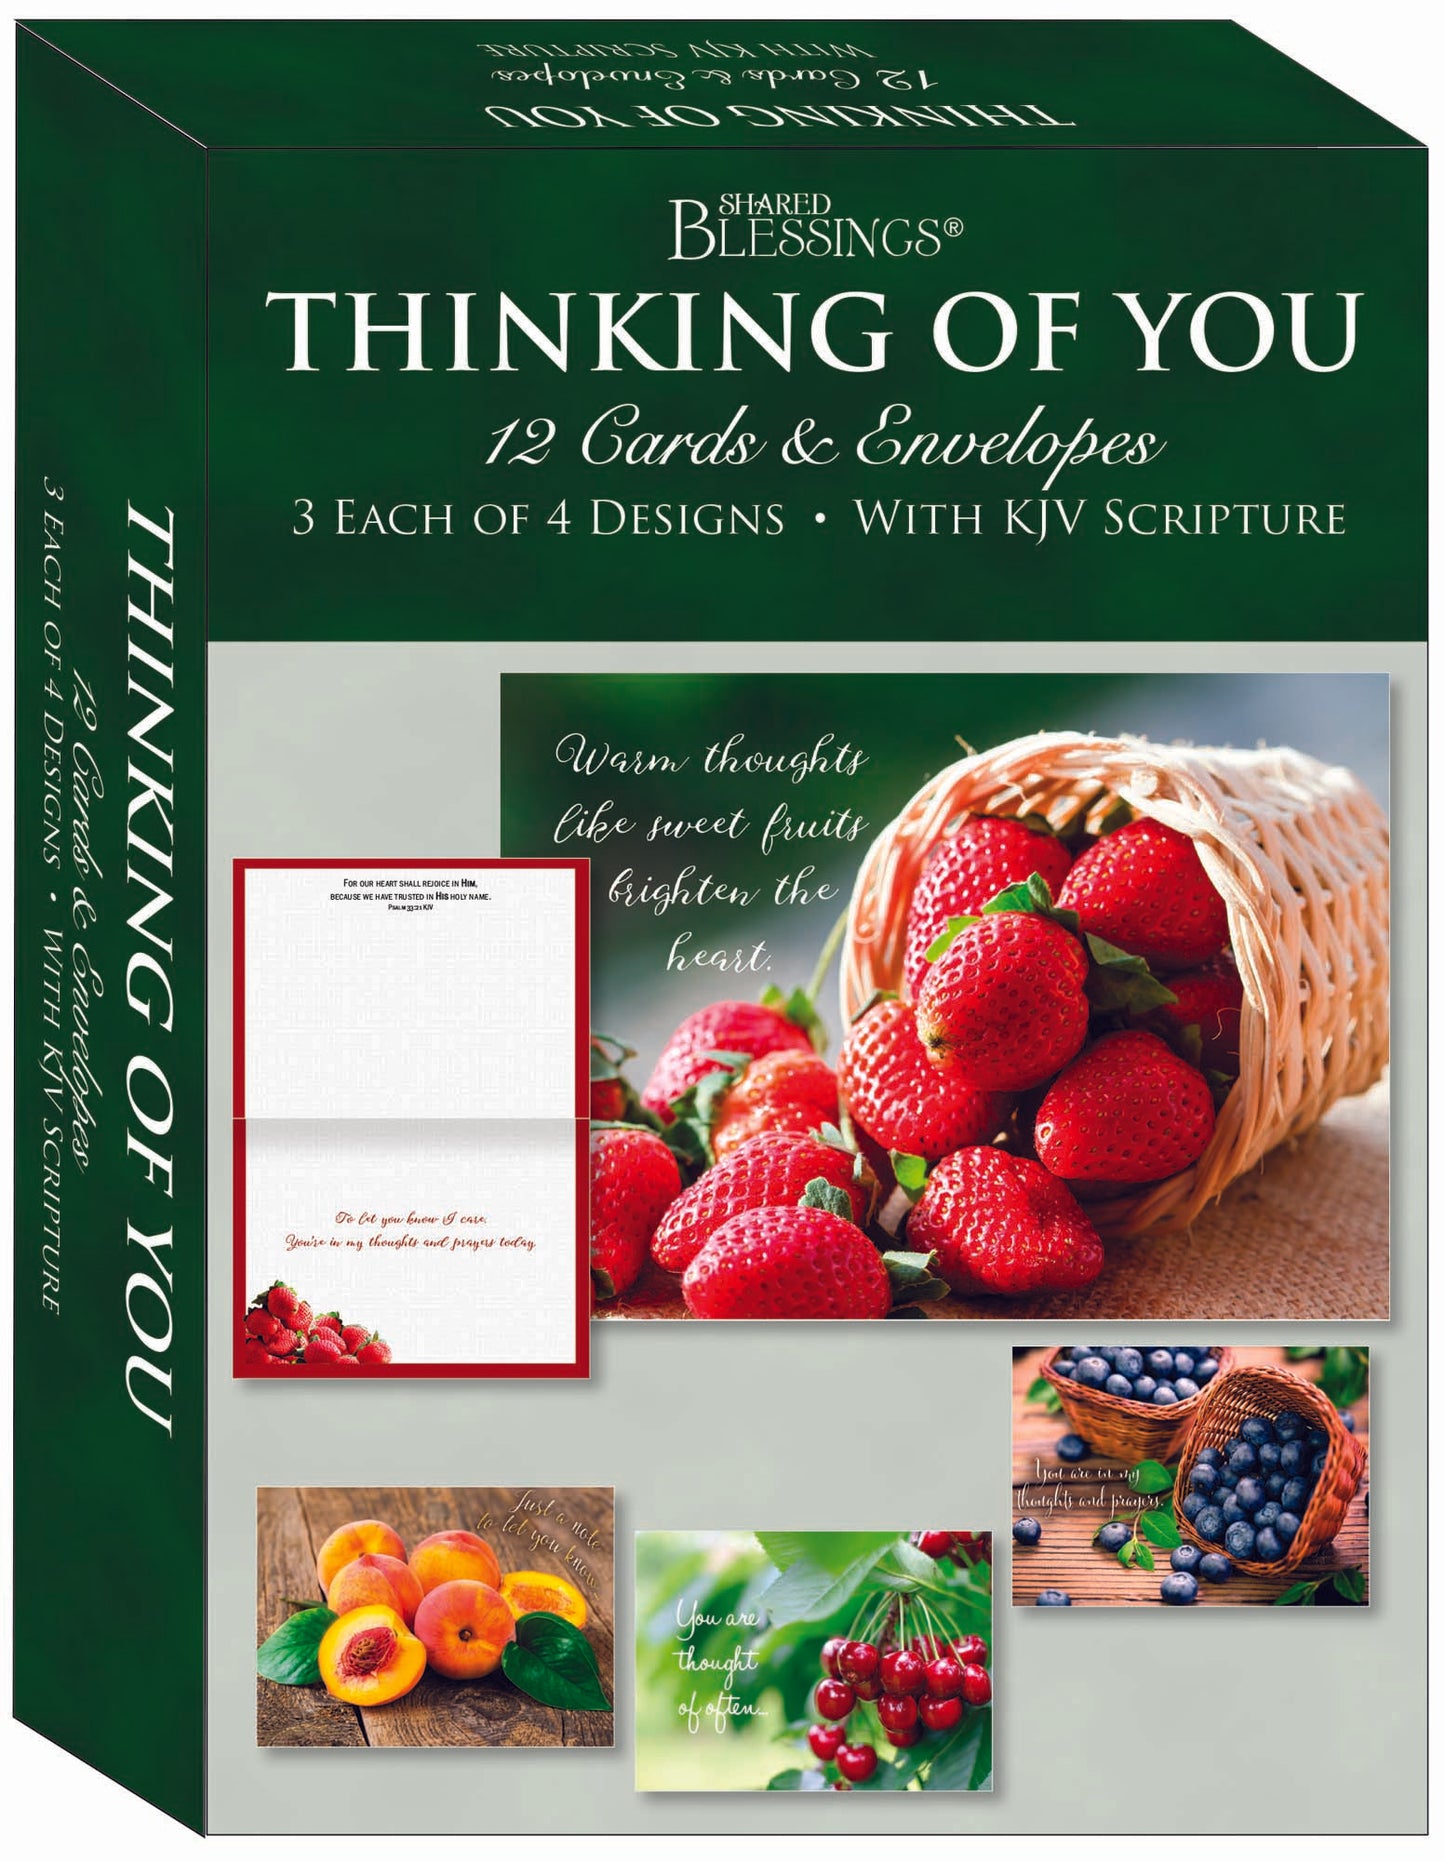 Thinking of You - Fruitful Blessings - Assorted Thinking of You Cards